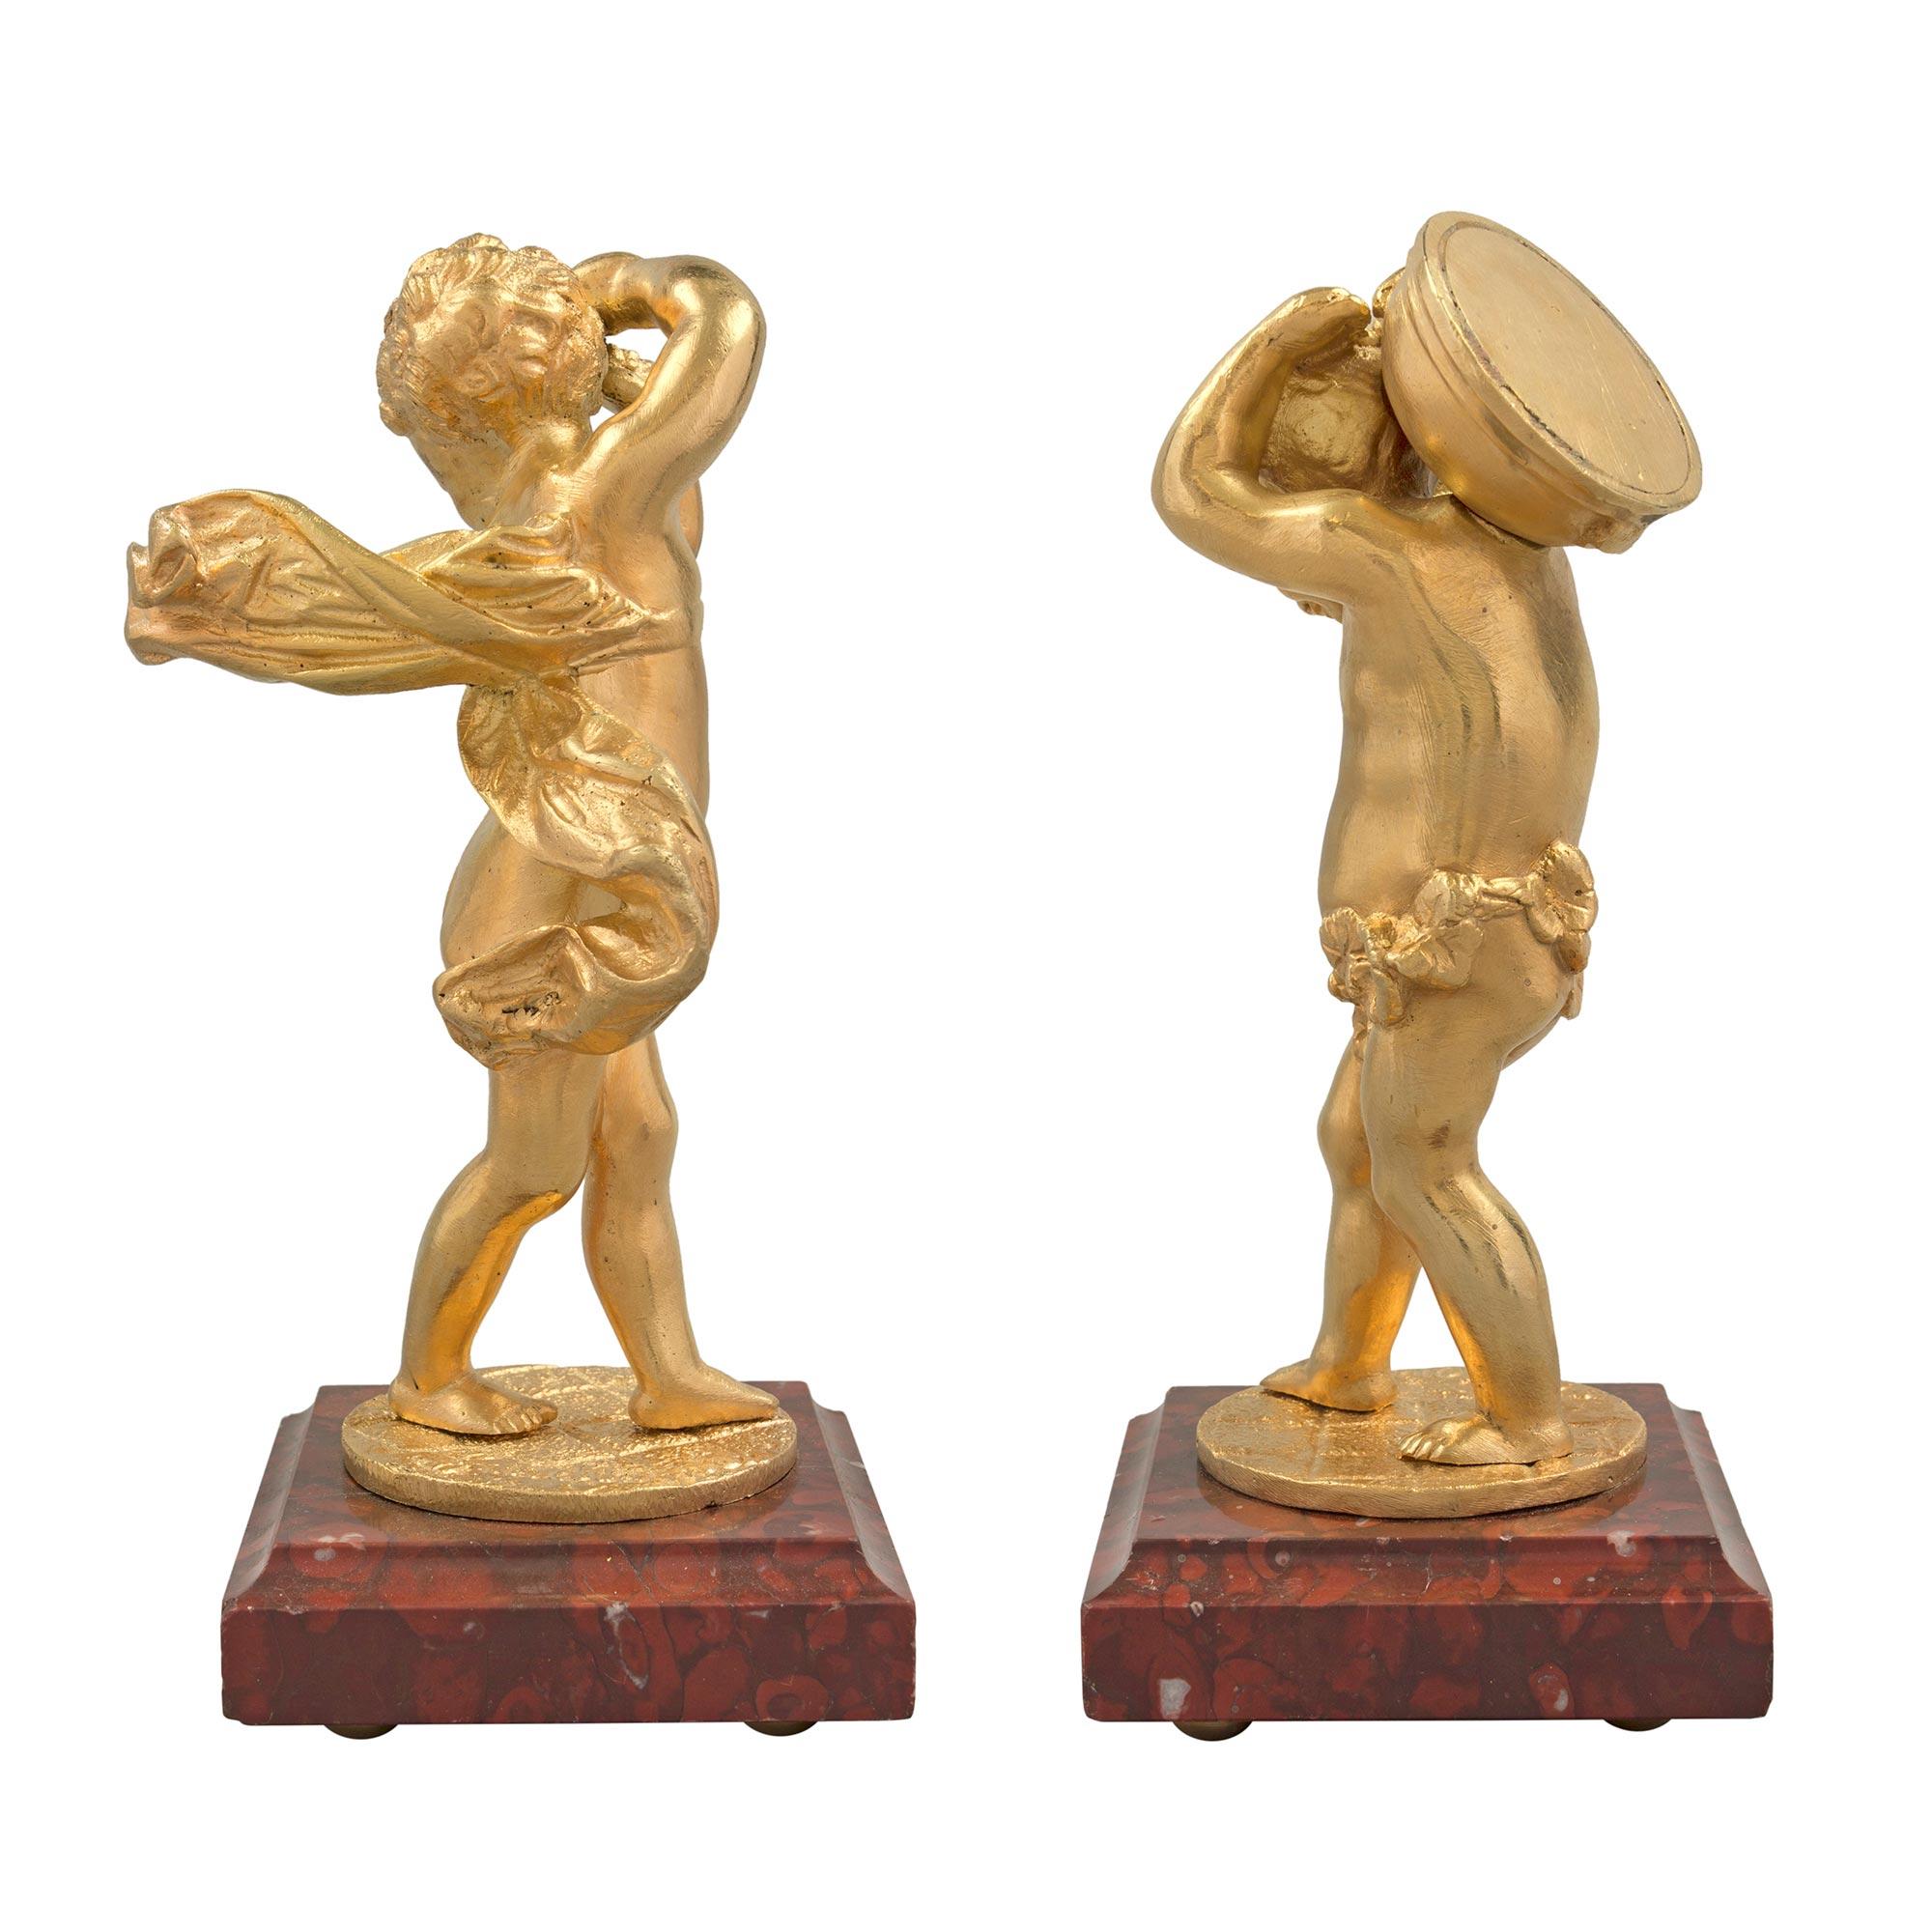 Pair of French 19th Century Louis XVI Style Ormolu Cherub Signed Statues For Sale 1